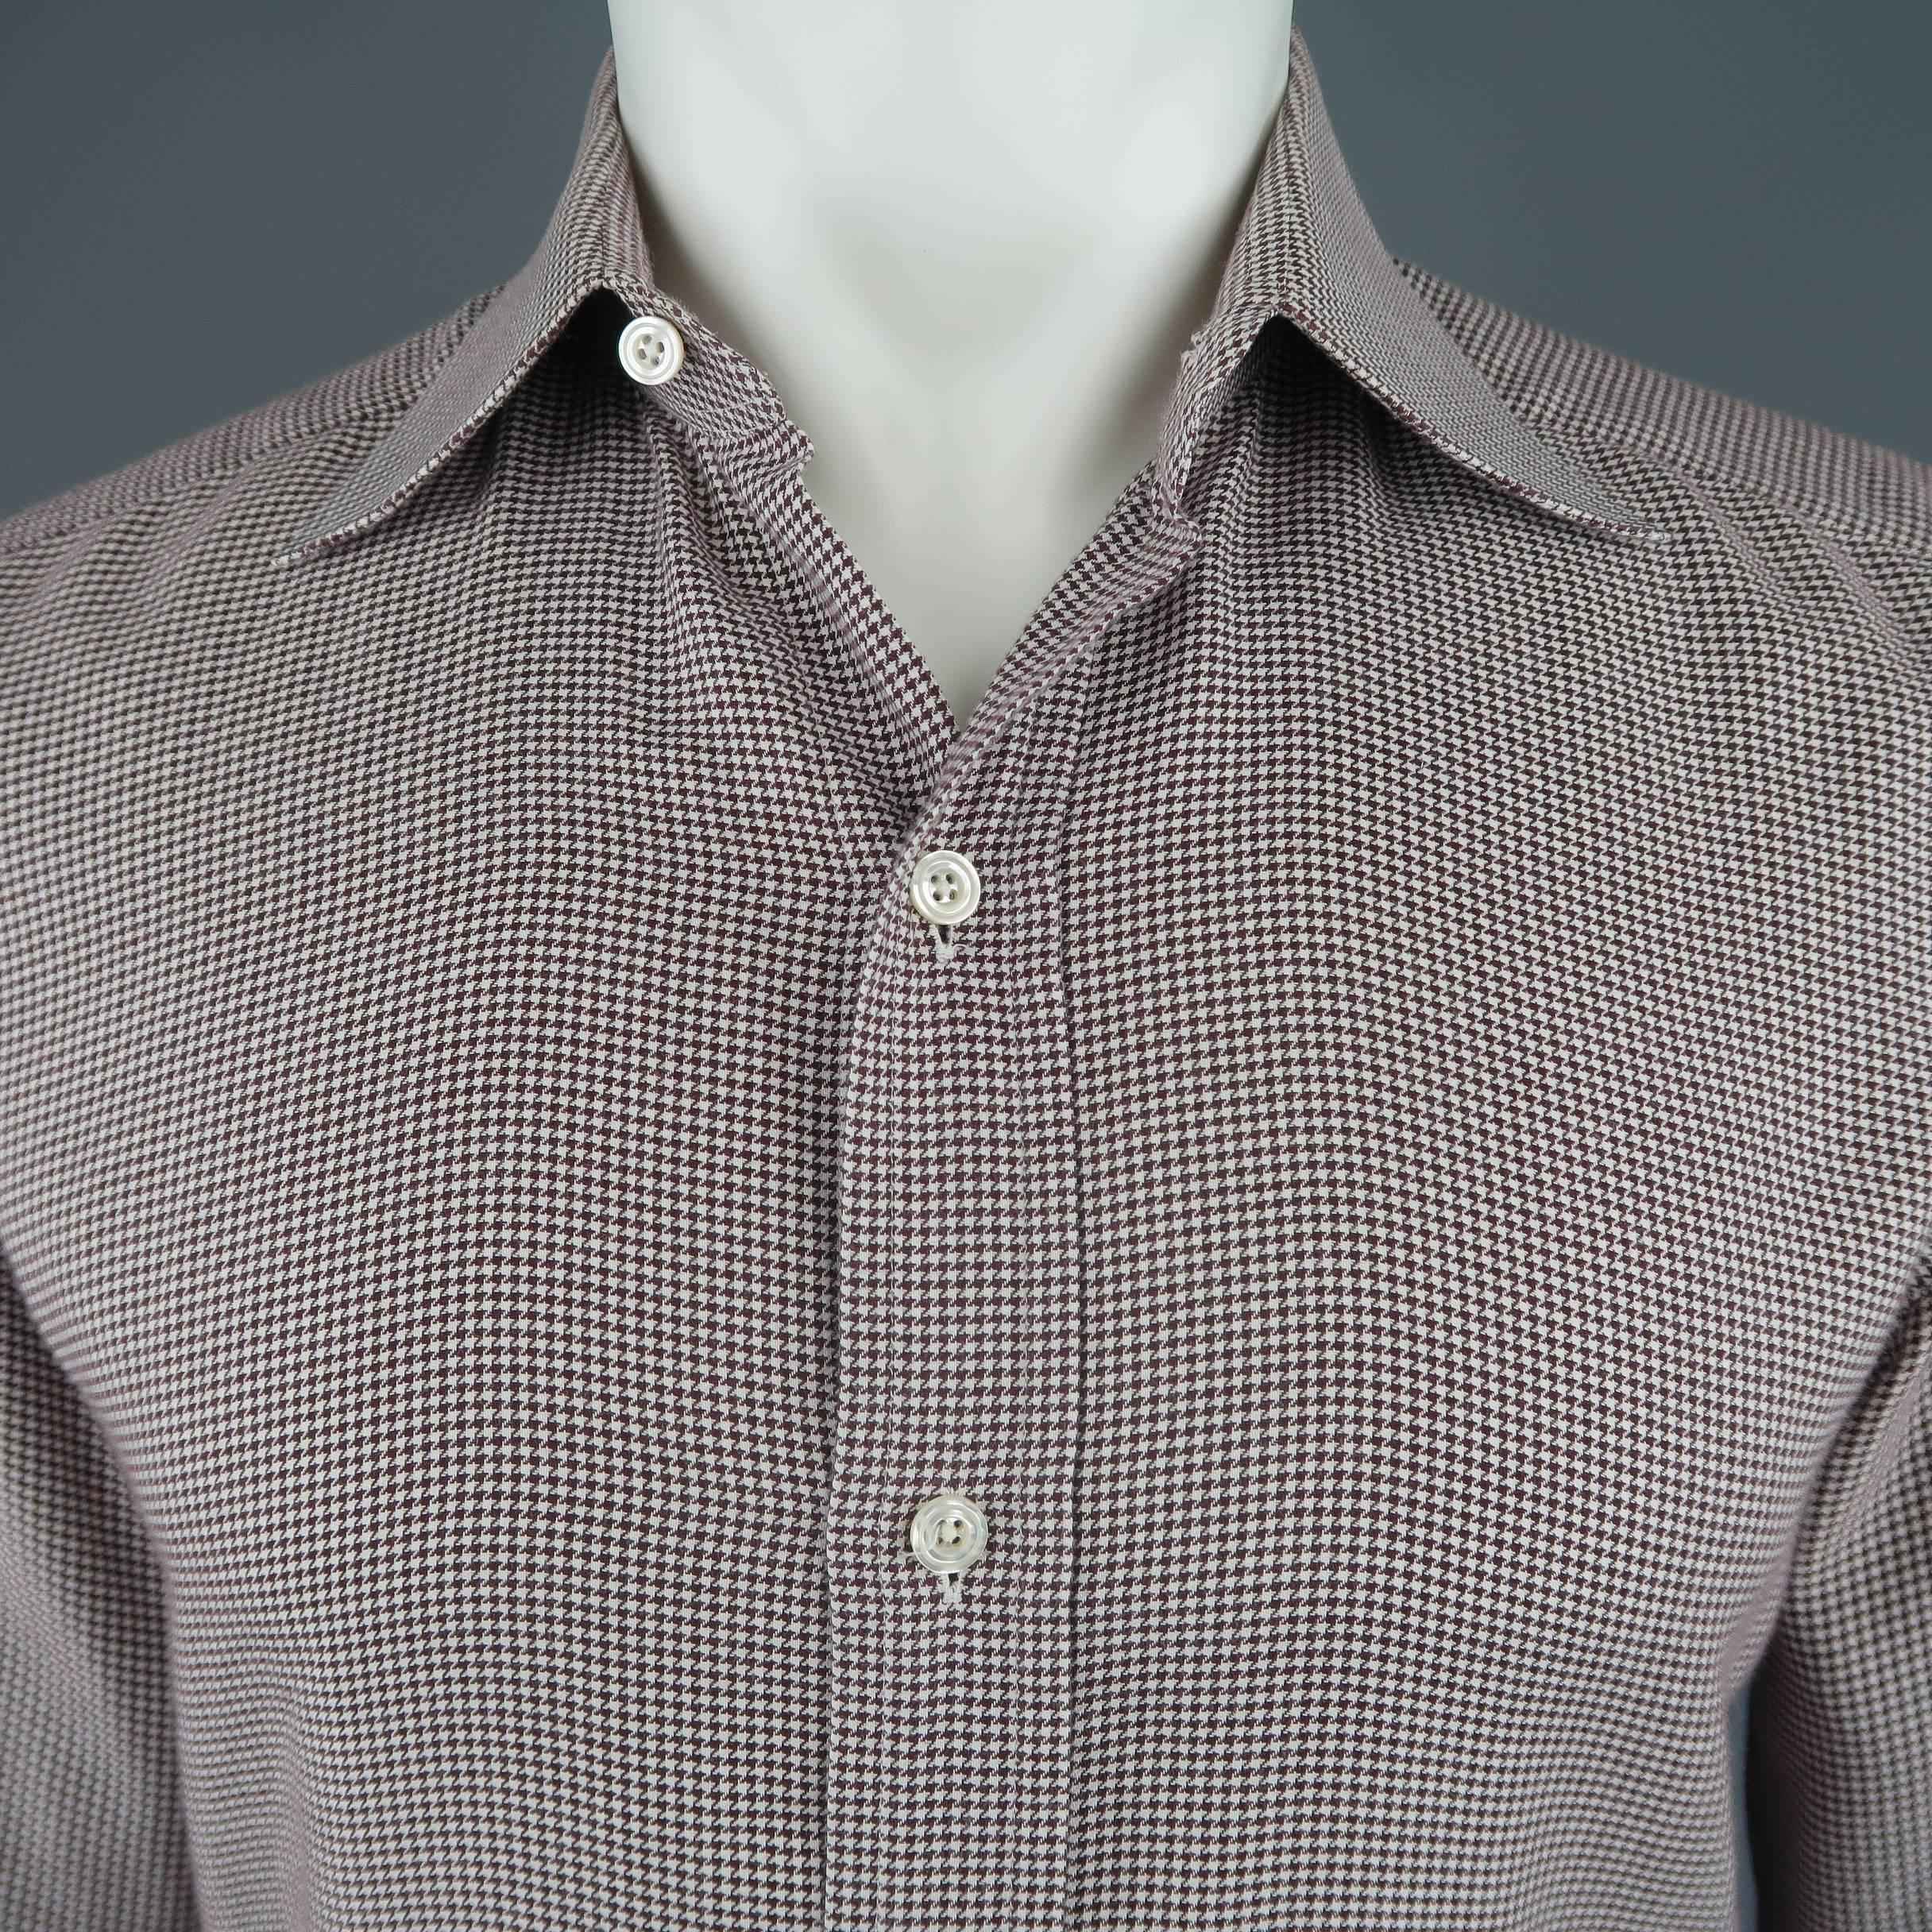 TOM FORD dress shirt comes in burgundy and cream micro houndstooth print soft cotton with a pointed spread collar and two button cuffs. Made in Switzerland.
 
Excellent Pre-Owned Condition.
Marked: 39  15 1/2
 
Measurements:
 
Shoulder: 15